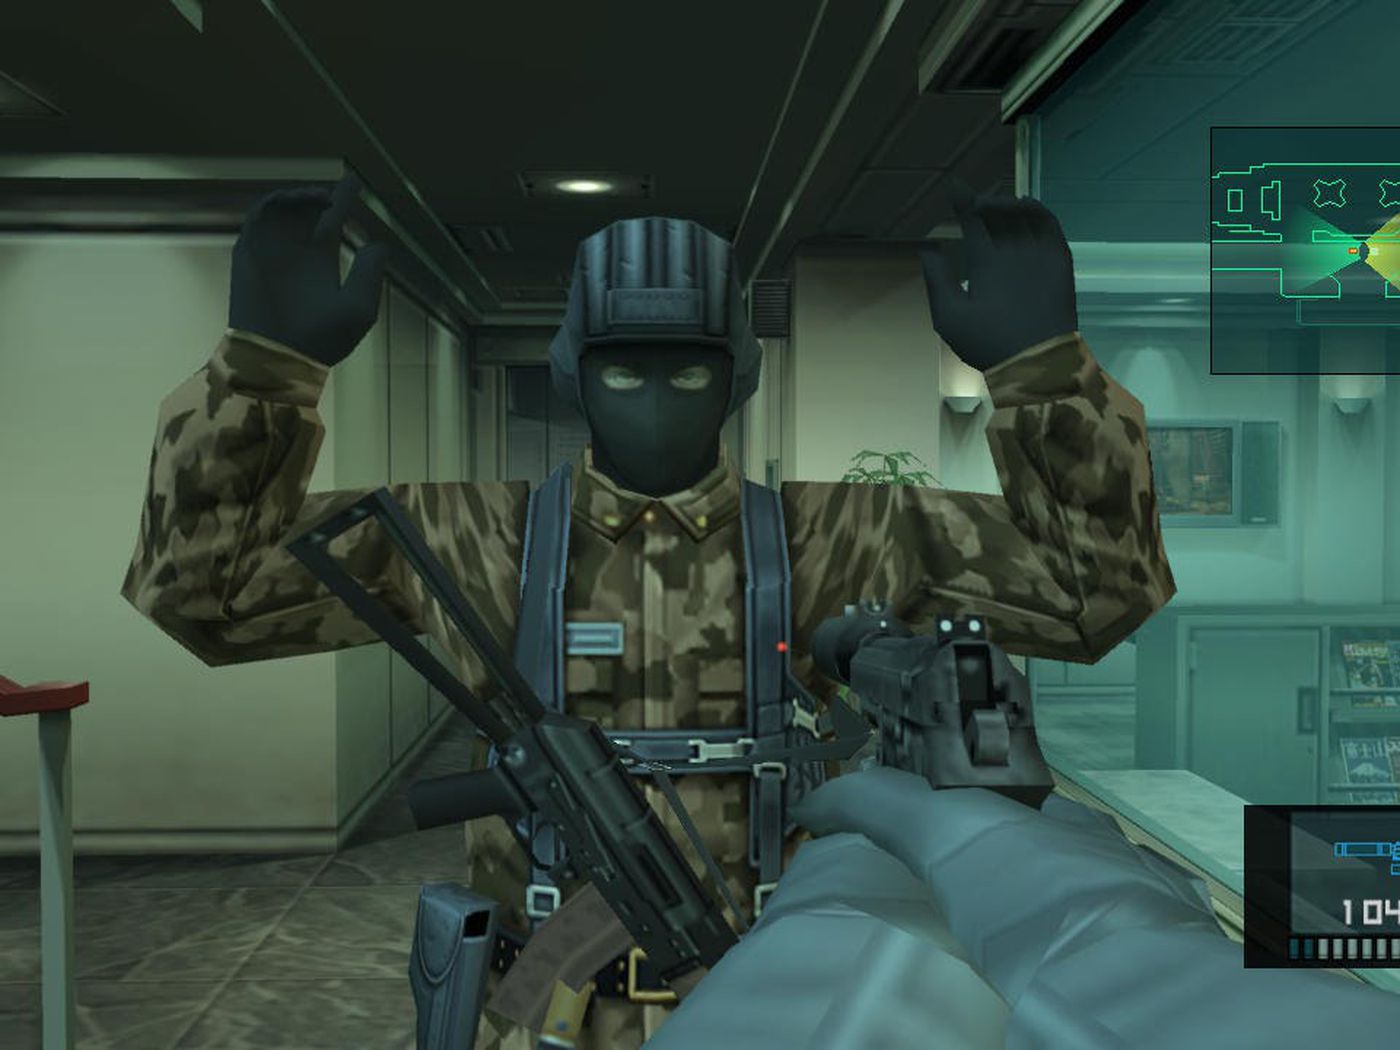 moverse Labe mientras Metal Gear Solid 2 and 3 pulled from stores over licensing issue - Polygon